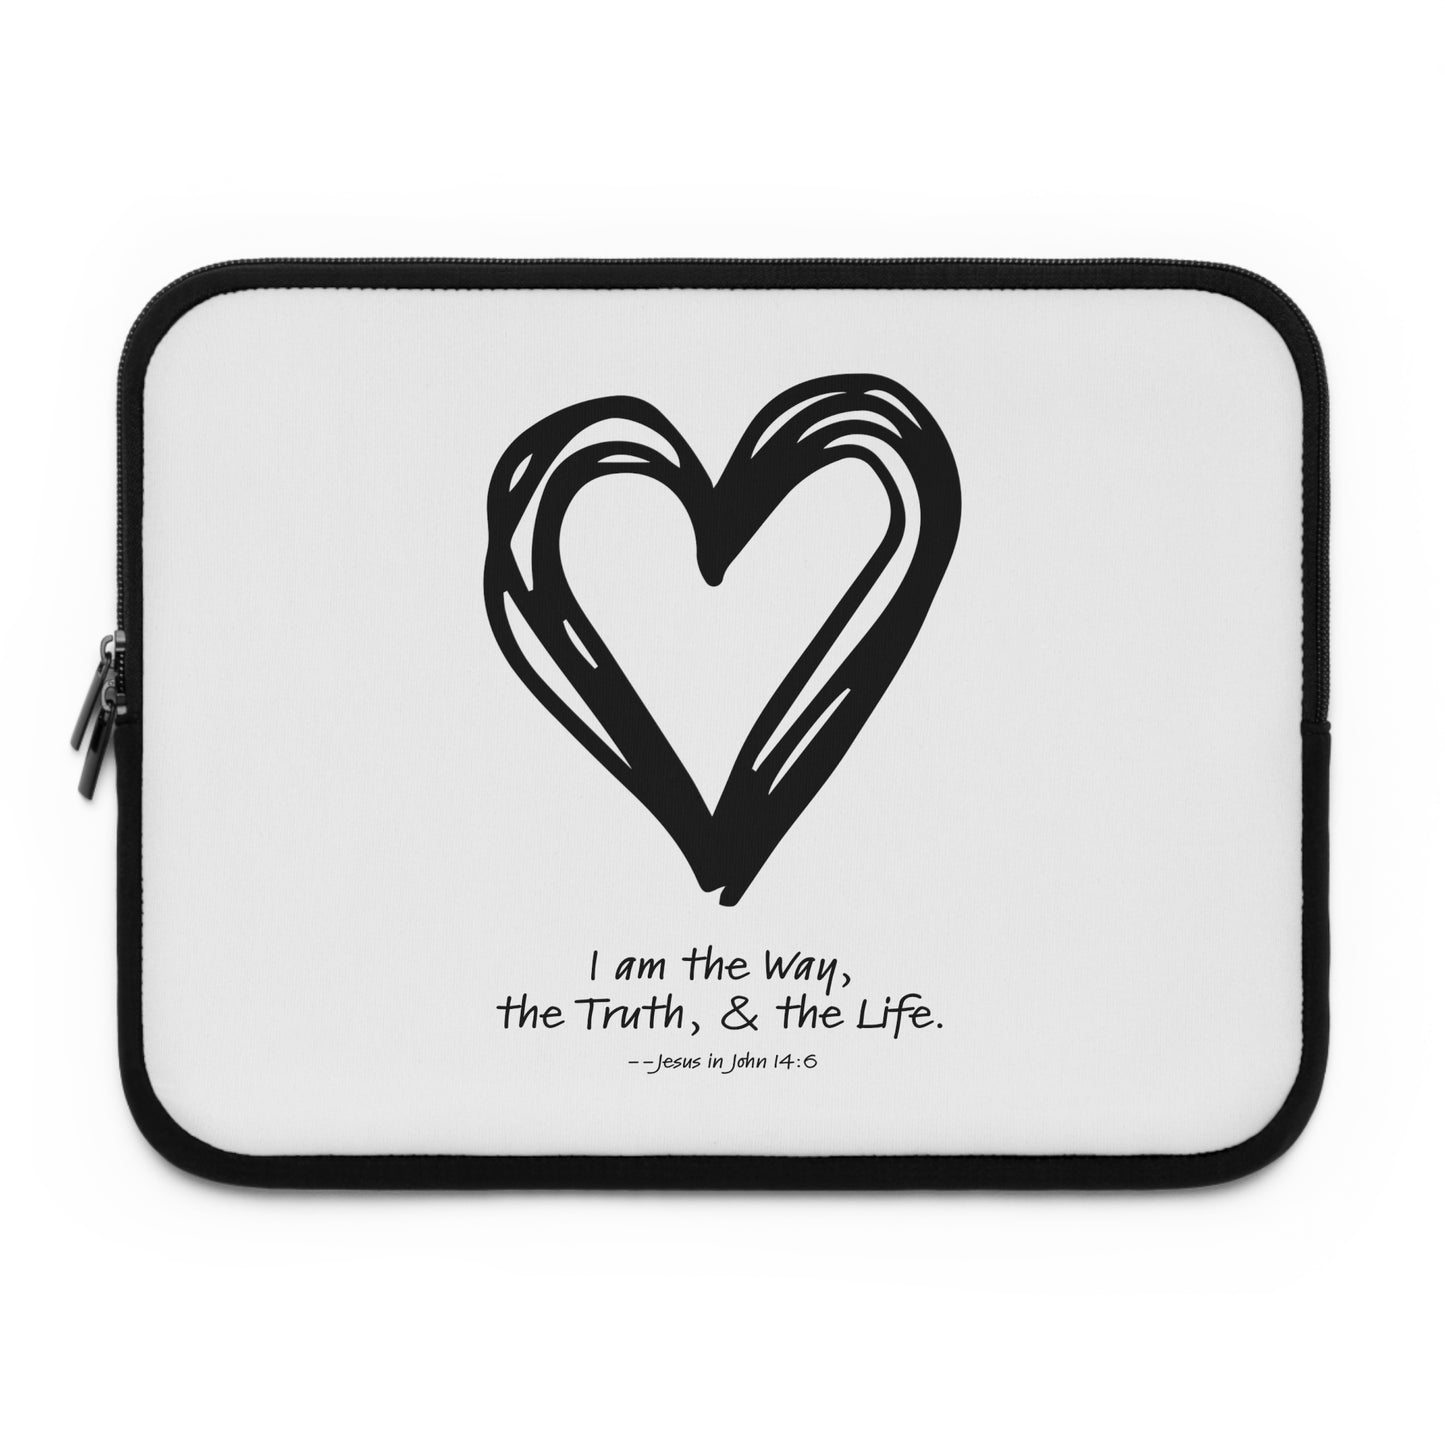 Laptop Sleeve - The Way, The Truth, & The Life